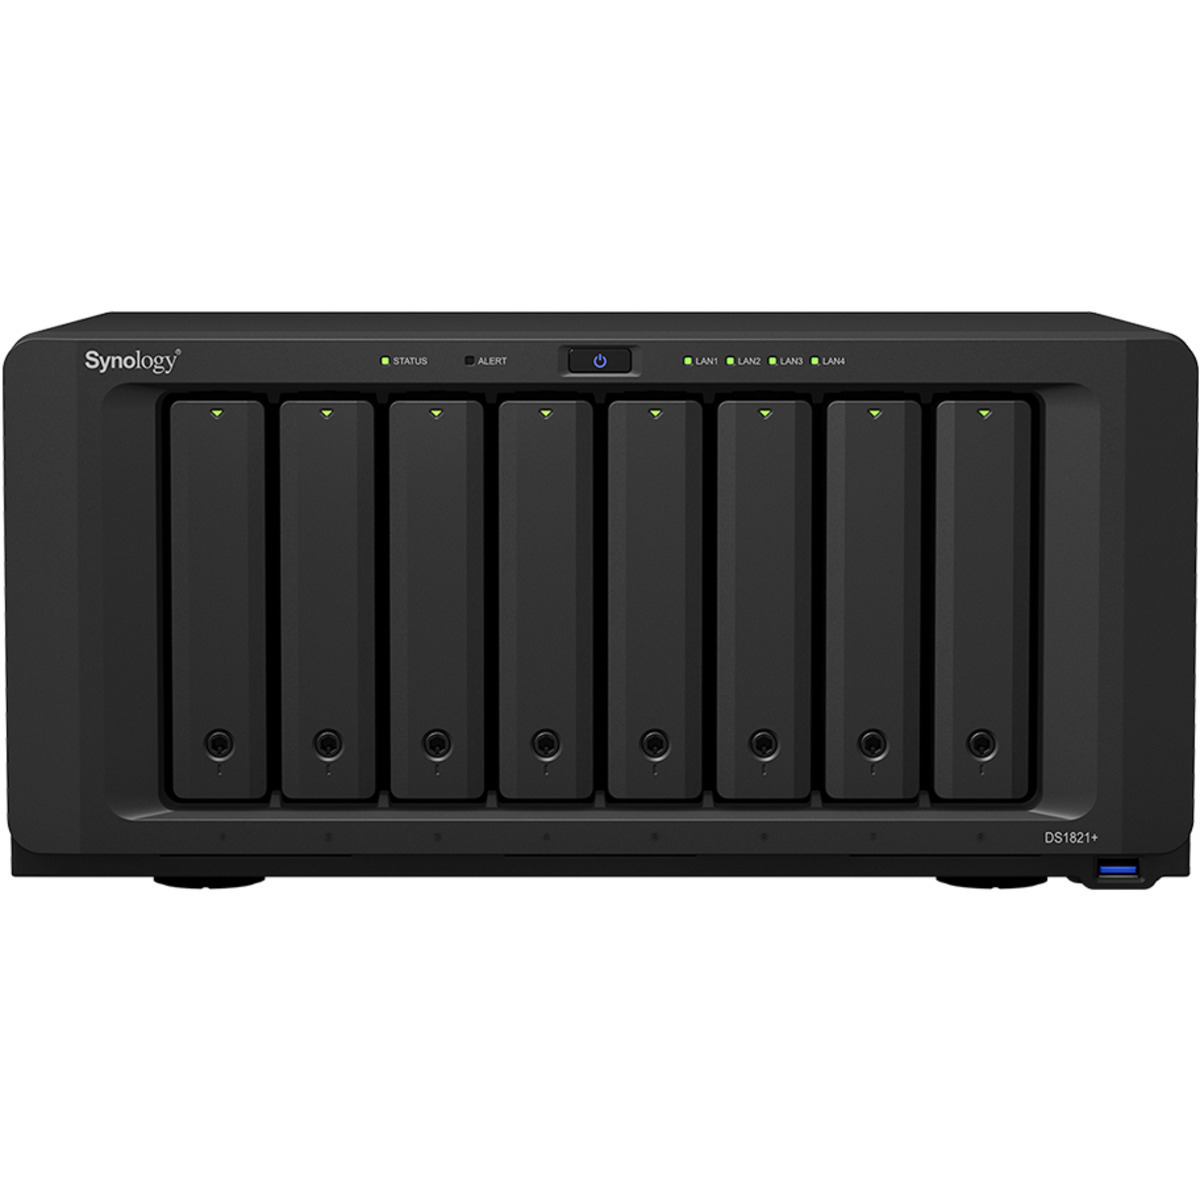 buy Synology DiskStation DS1821+ 160tb Desktop NAS - Network Attached Storage Device 8x20000gb Seagate EXOS X20 ST20000NM007D 3.5 7200rpm SATA 6Gb/s HDD ENTERPRISE Class Drives Installed - Burn-In Tested - FREE RAM UPGRADE - nas headquarters buy network attached storage server device das new raid-5 free shipping simply usa DiskStation DS1821+